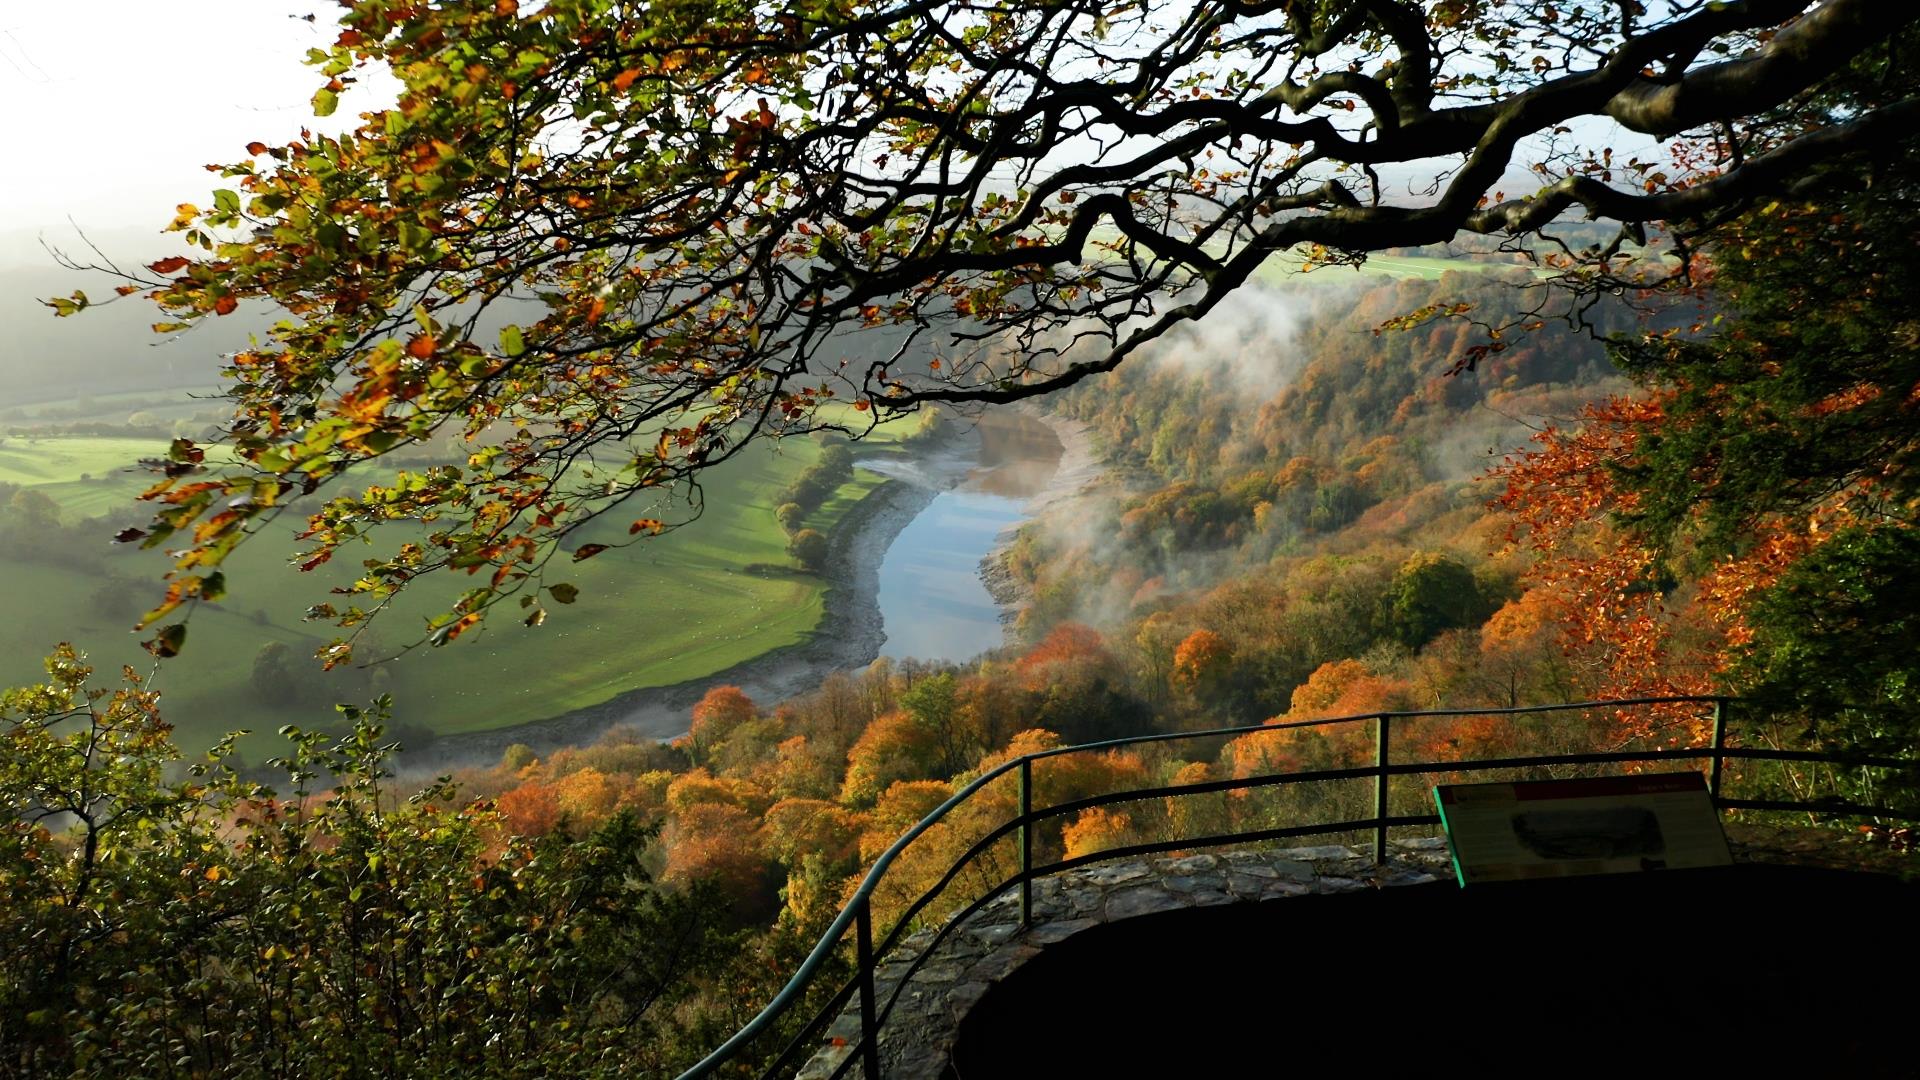 Autumn at Eagle's Nest in the Wye Valley